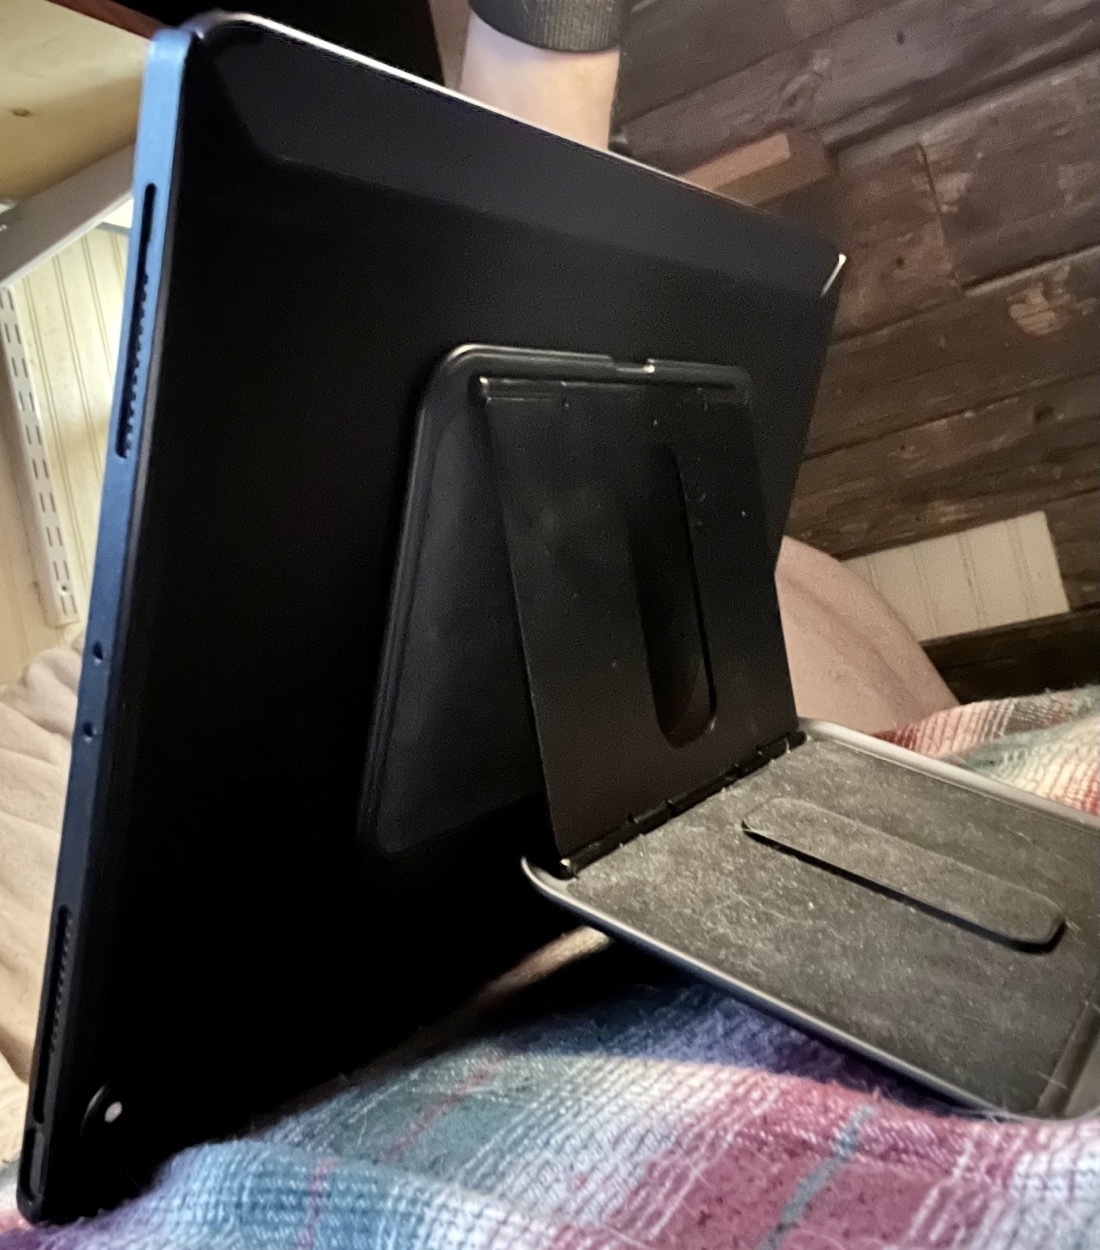 An iPad with an adjustable kickstand attached to the back via a magnet. The iPad is resting on a pillow.